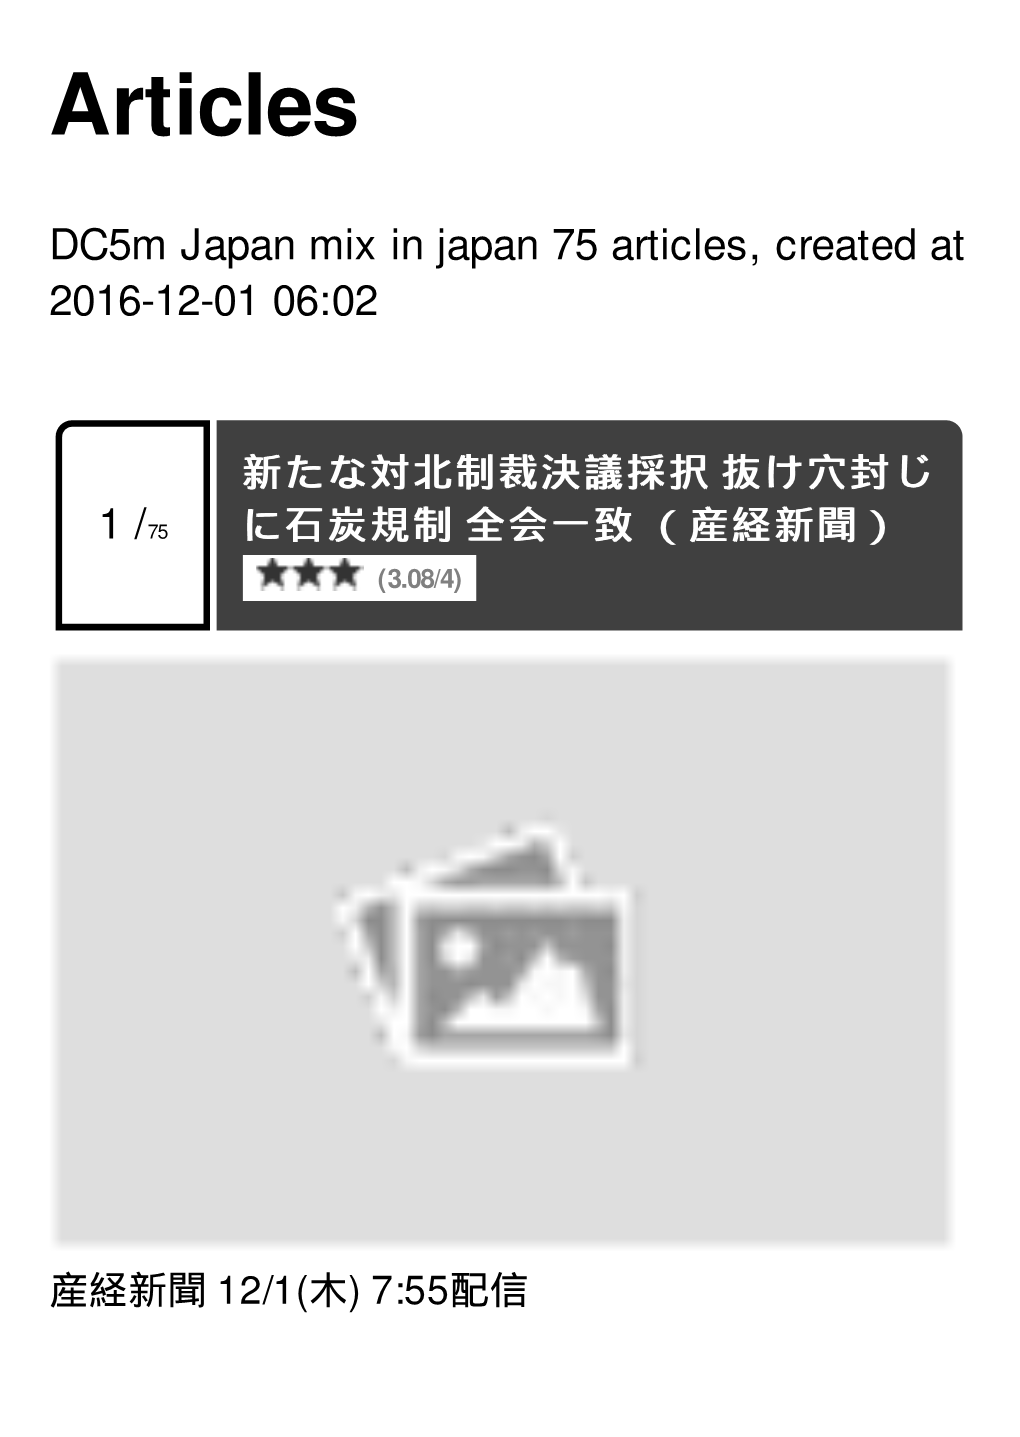 Dc5m Japan Mix in Japan Created at 2016-12-01 06:09